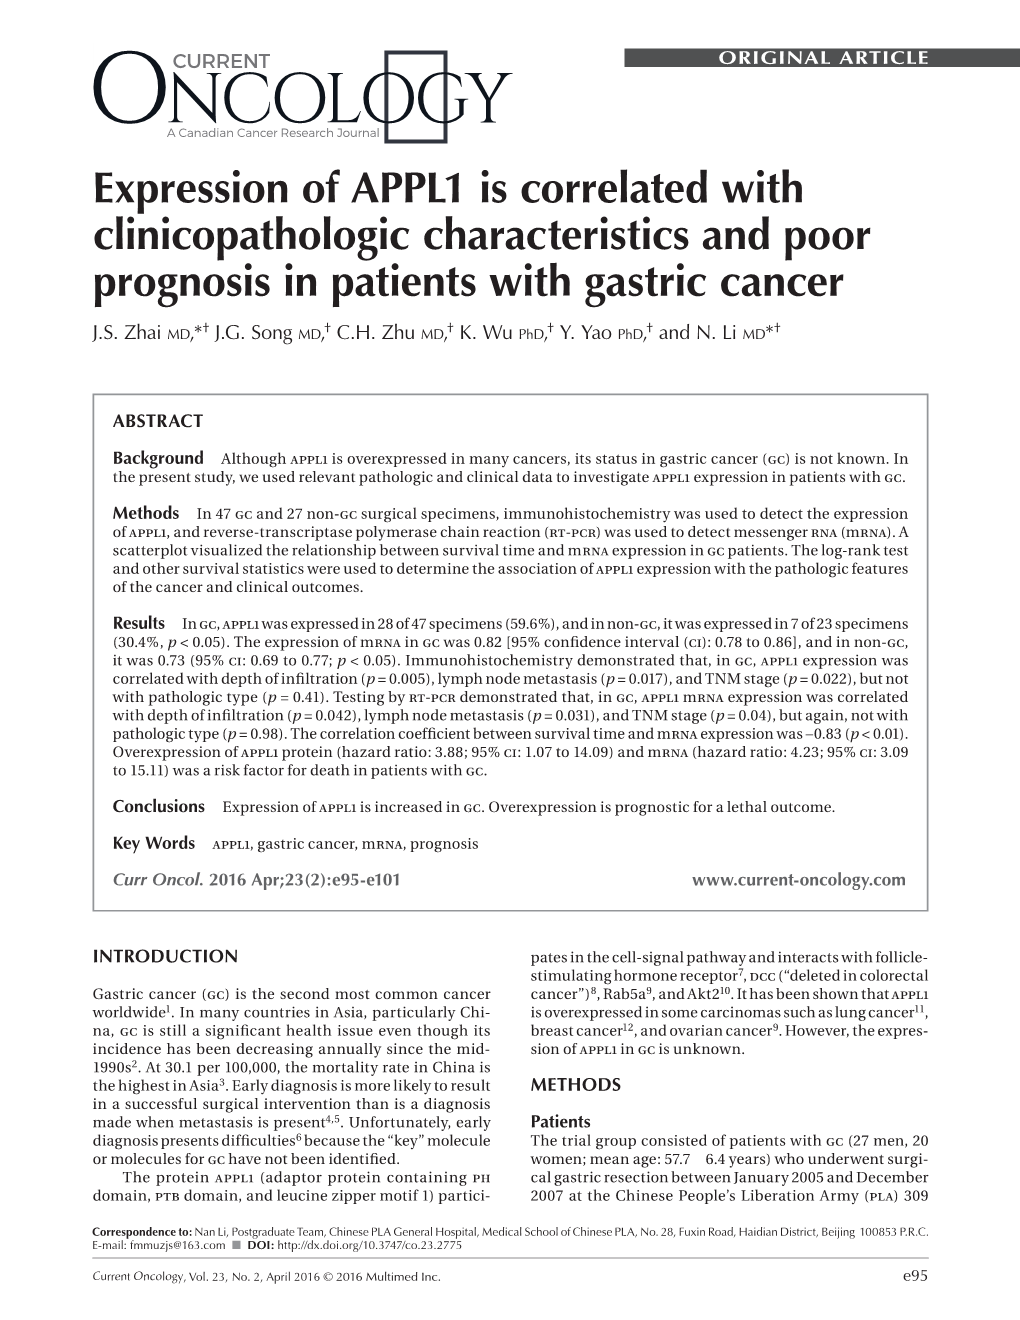 Expression of APPL1 Is Correlated with Clinicopathologic Characteristics and Poor Prognosis in Patients with Gastric Cancer